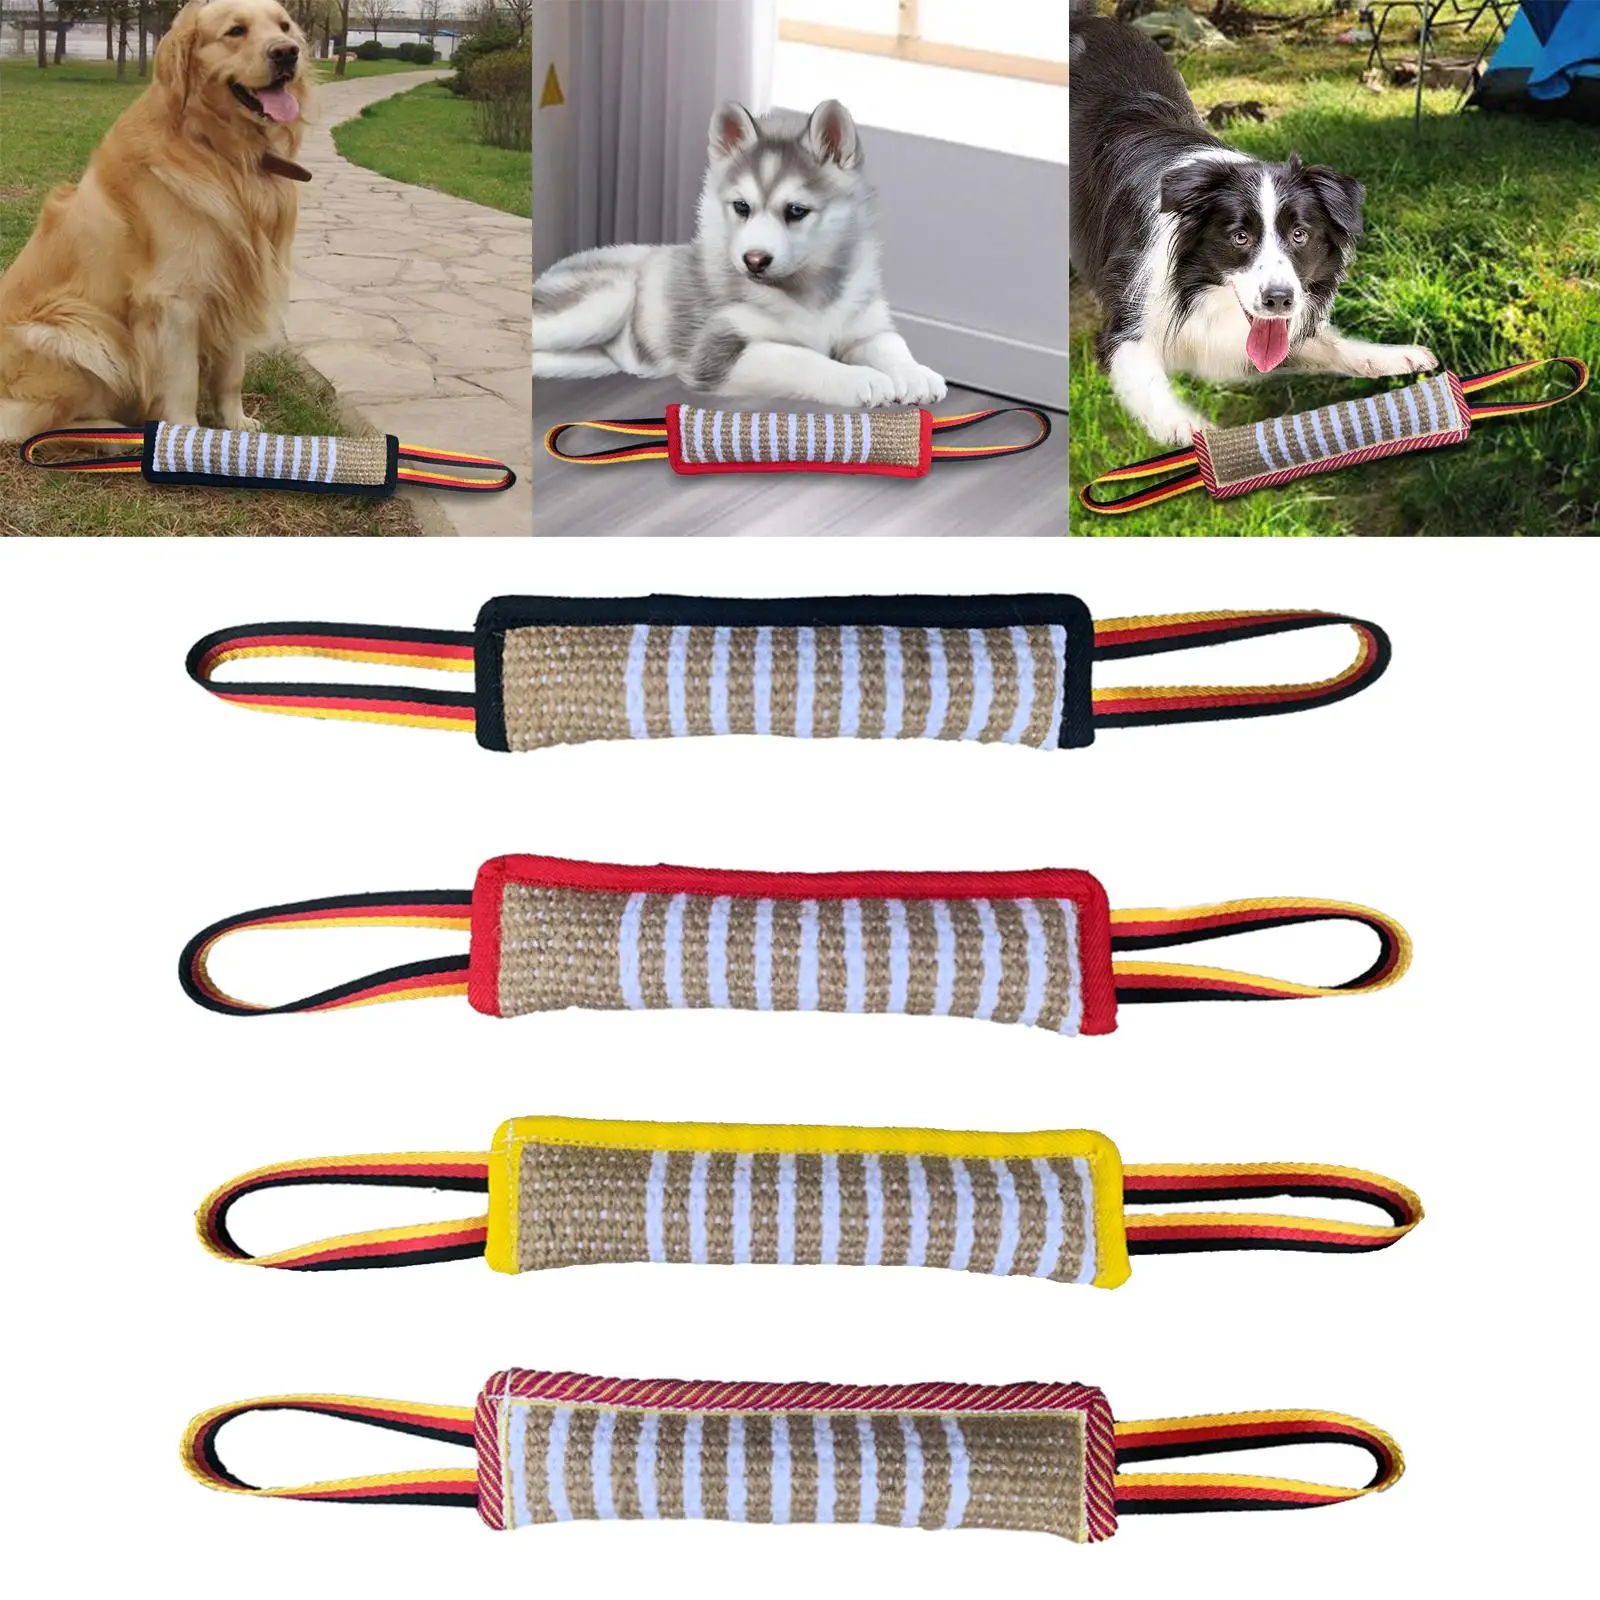 Dog Bite Tug Toy Training Bite Pillow Bite Sleeve Stick Biting Resistant Interactive Play W/ Two soft Handles for Exercise Puppy